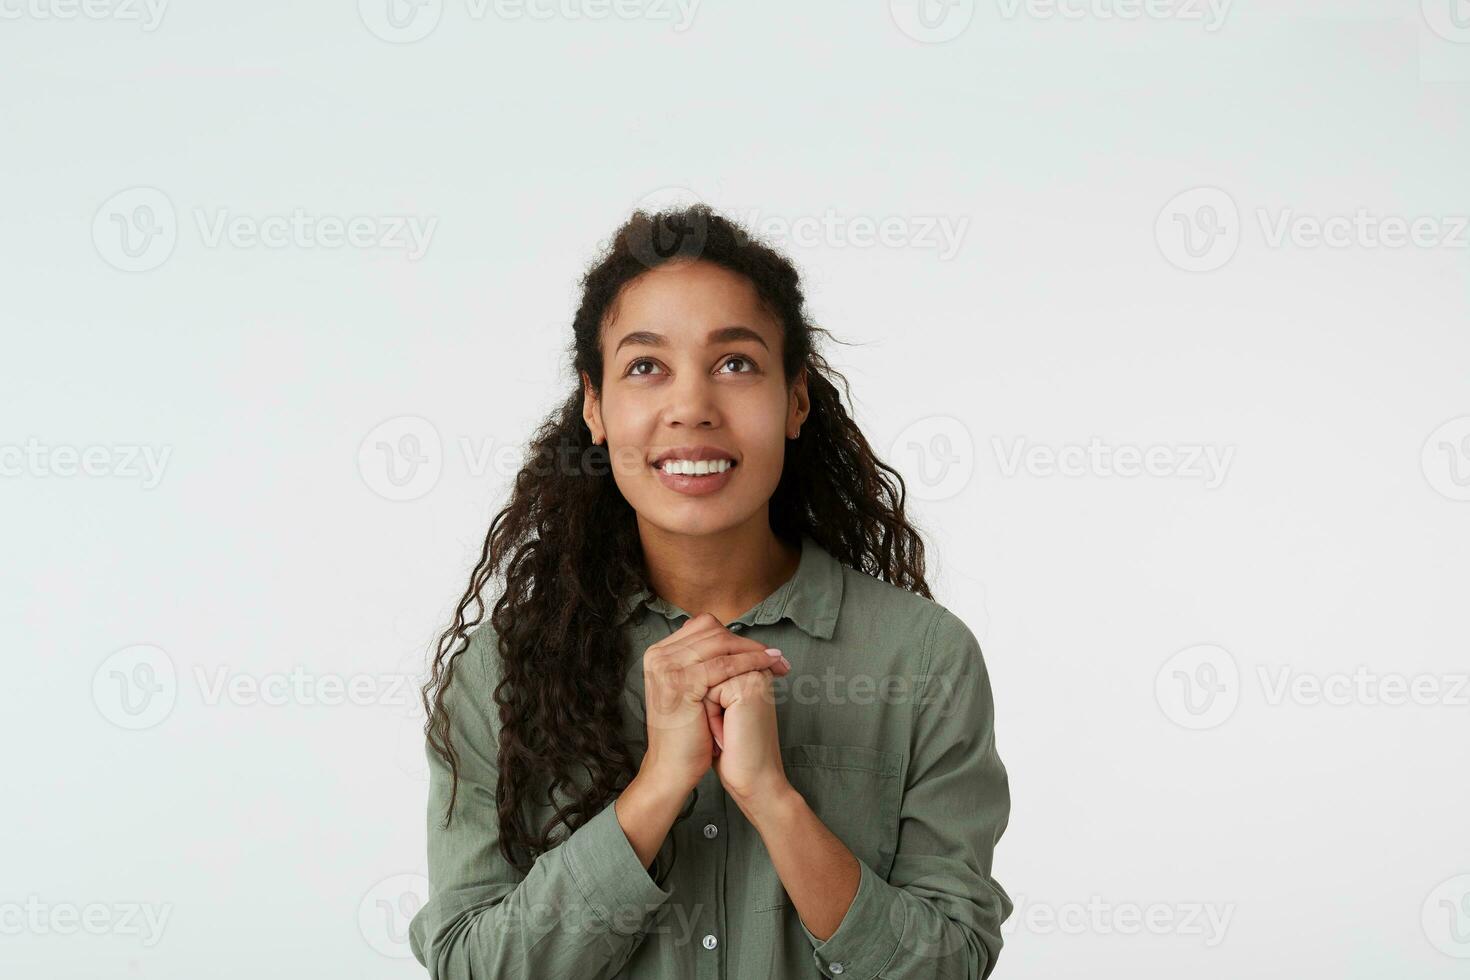 Indoor photo of cheerful brown haired curly dark skinned woman with casual hairstyle smiling widely while looking upwards and keeping raised hand together, isolated over white background